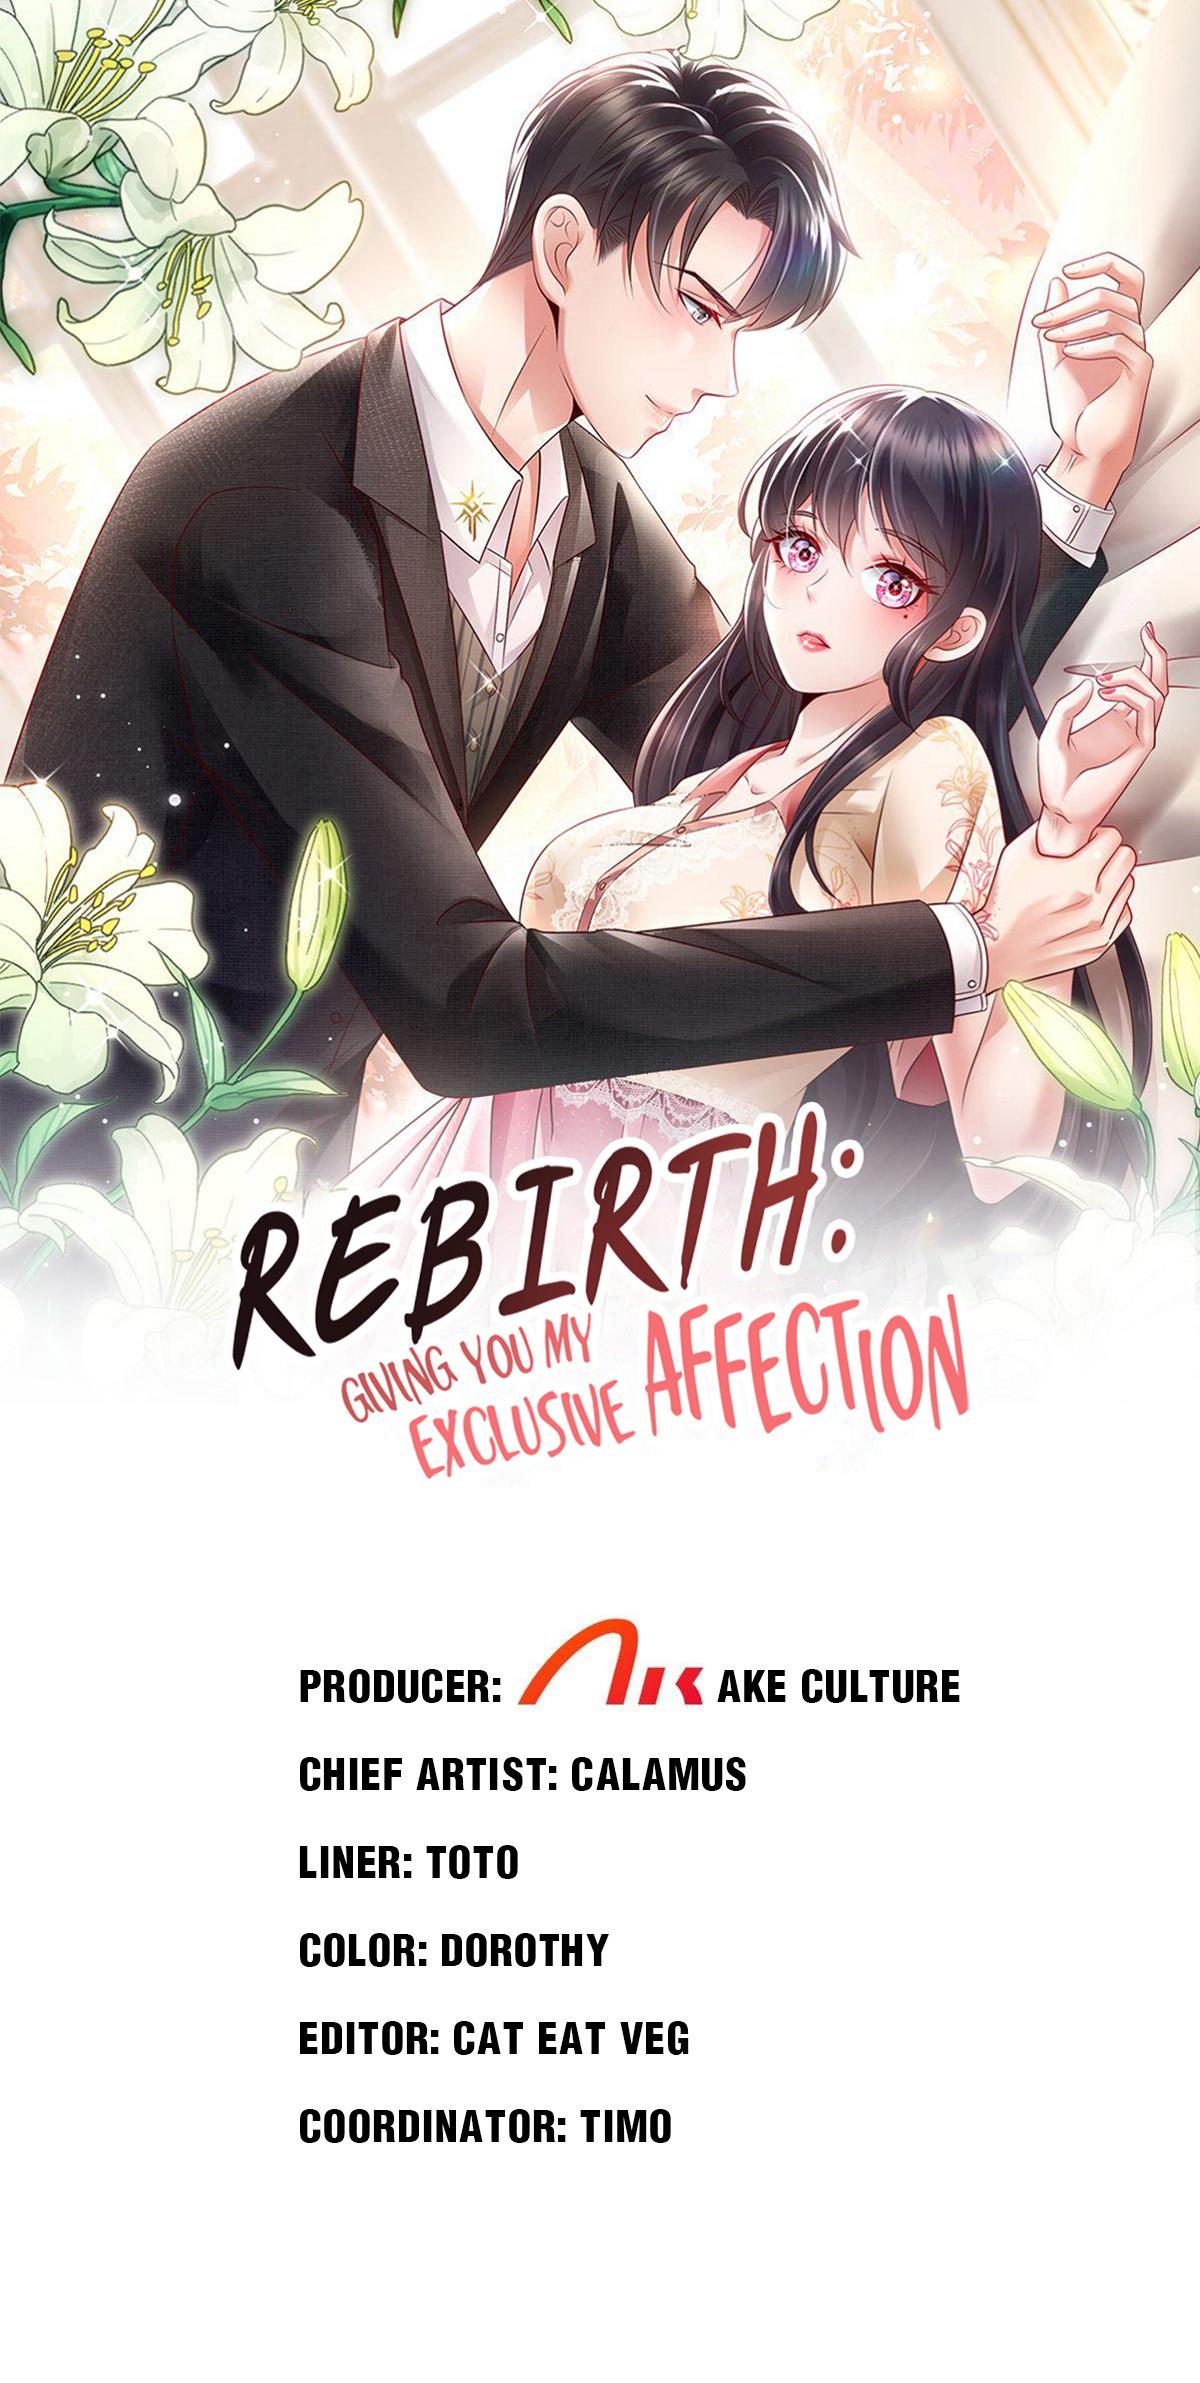 Rebirth: Giving You My Exclusive Affection 128